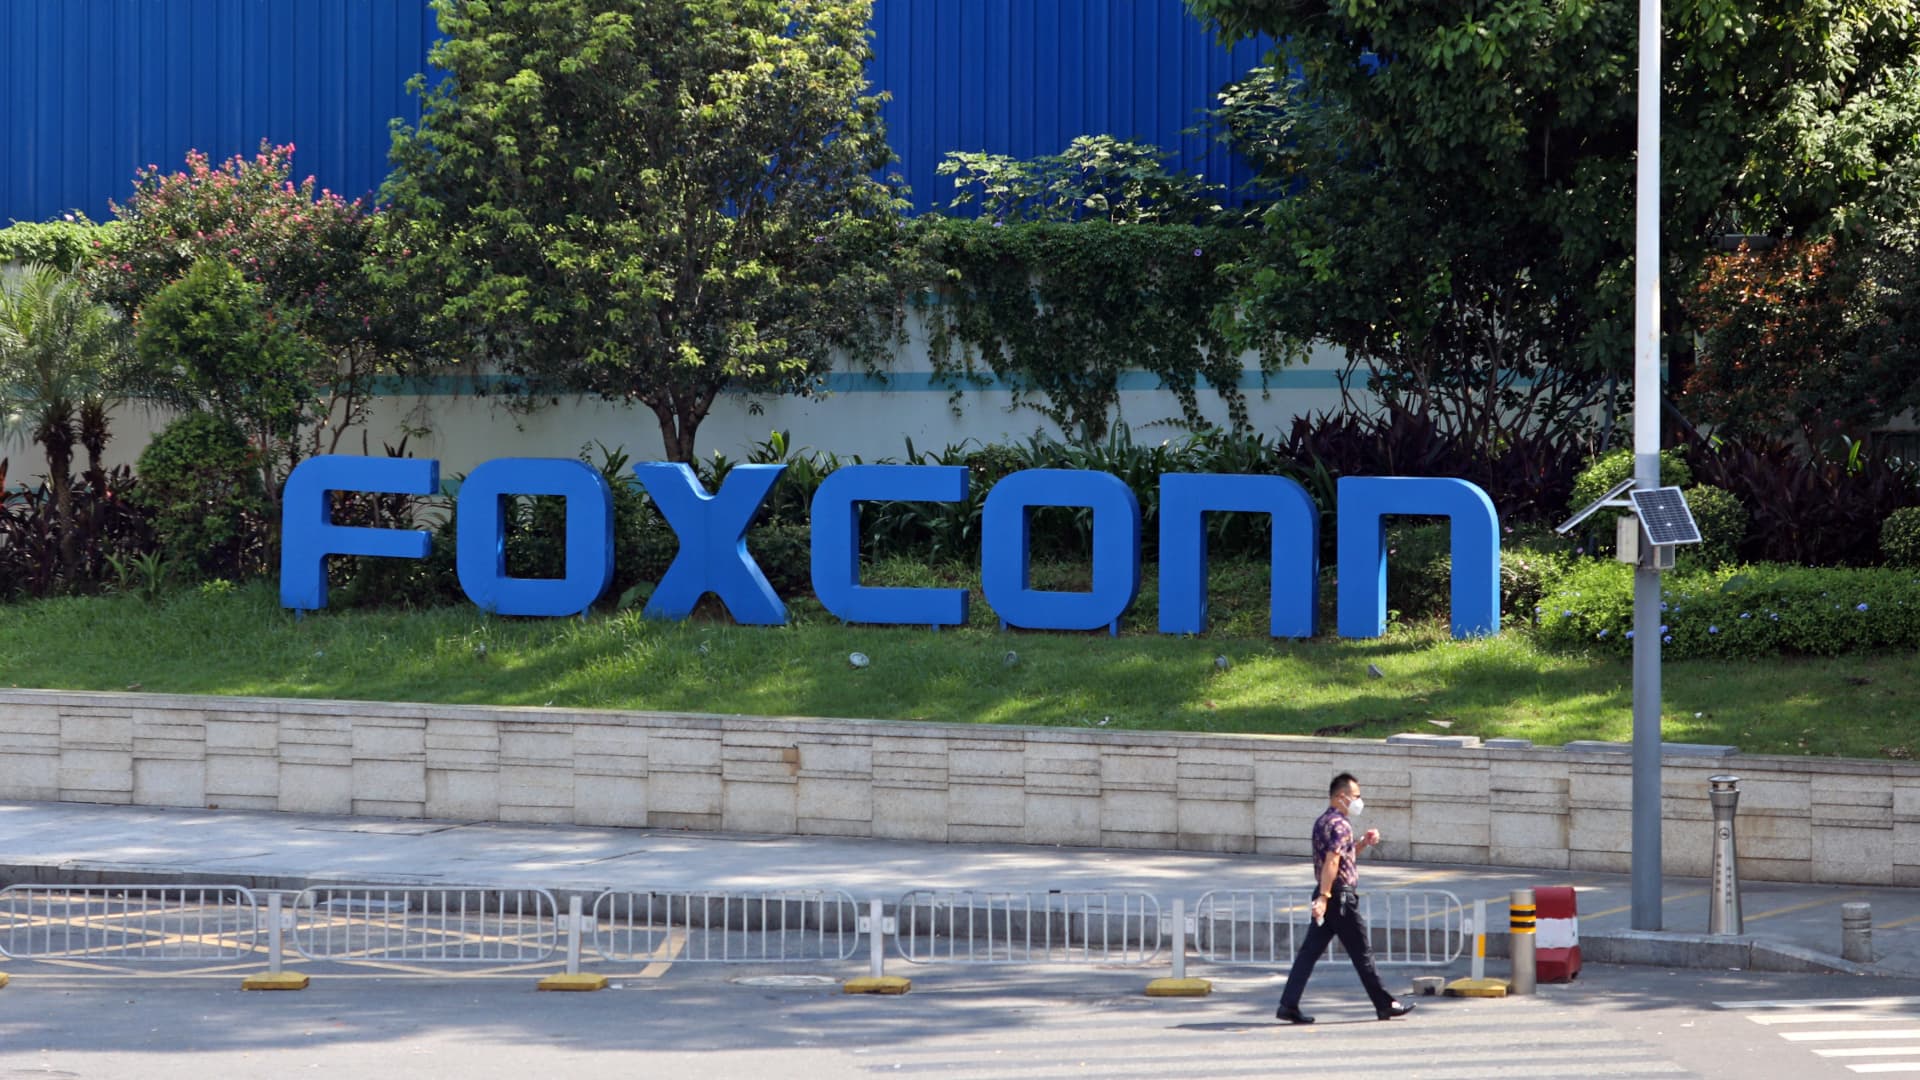 Apple supplier Foxconn helped convince China to loosen Covid rules: report